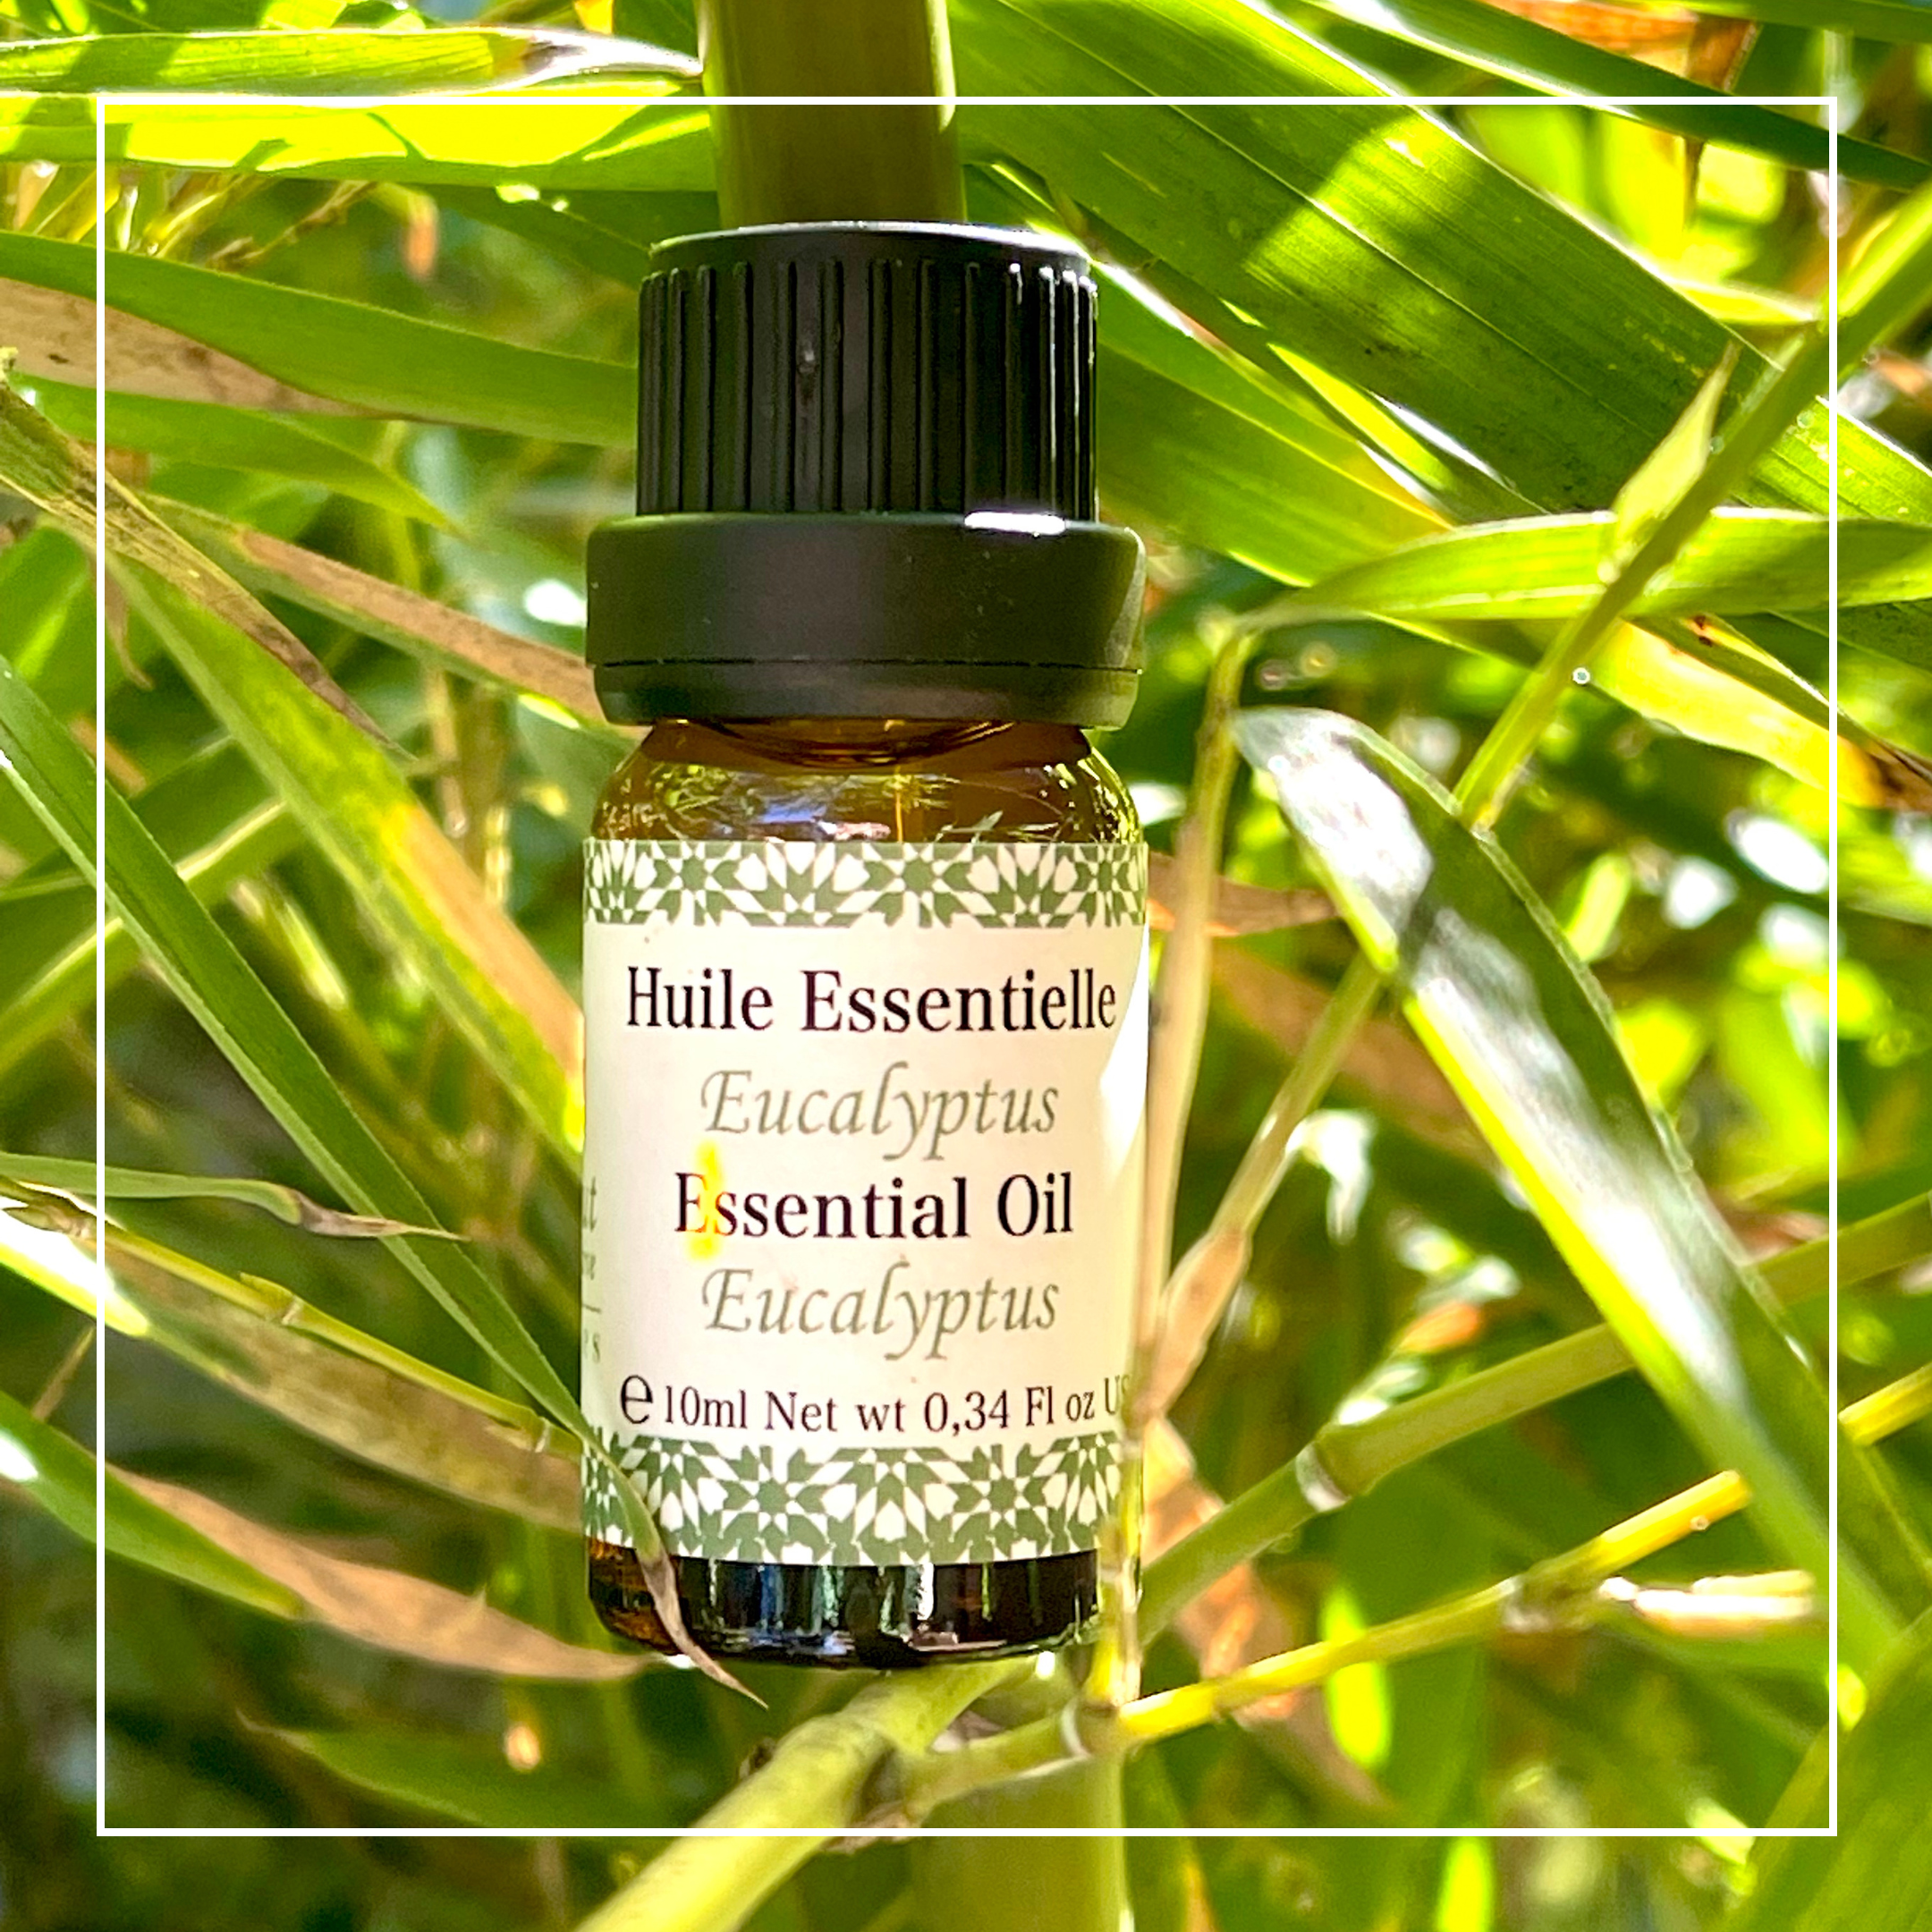 Huile essentielle d'Eucalyptus – Cooperative Yacout